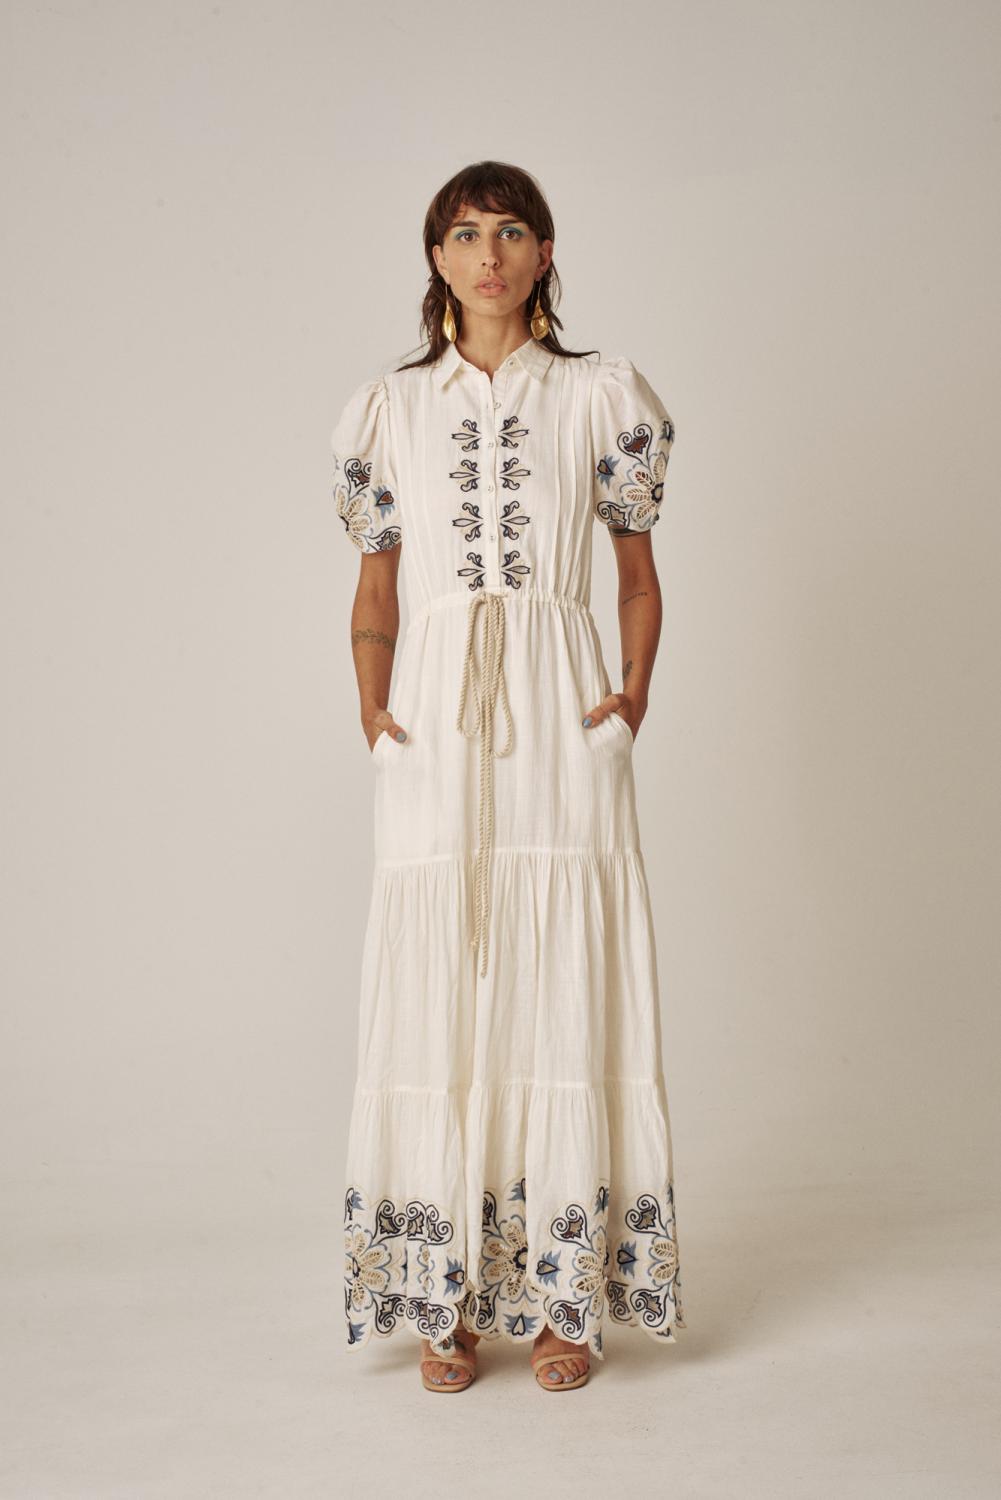 The Geo Dress from designer Carolina K in gardenia features hand cutout embroidery details in the top and bottom, draw string waist with rope belt, a collared top.